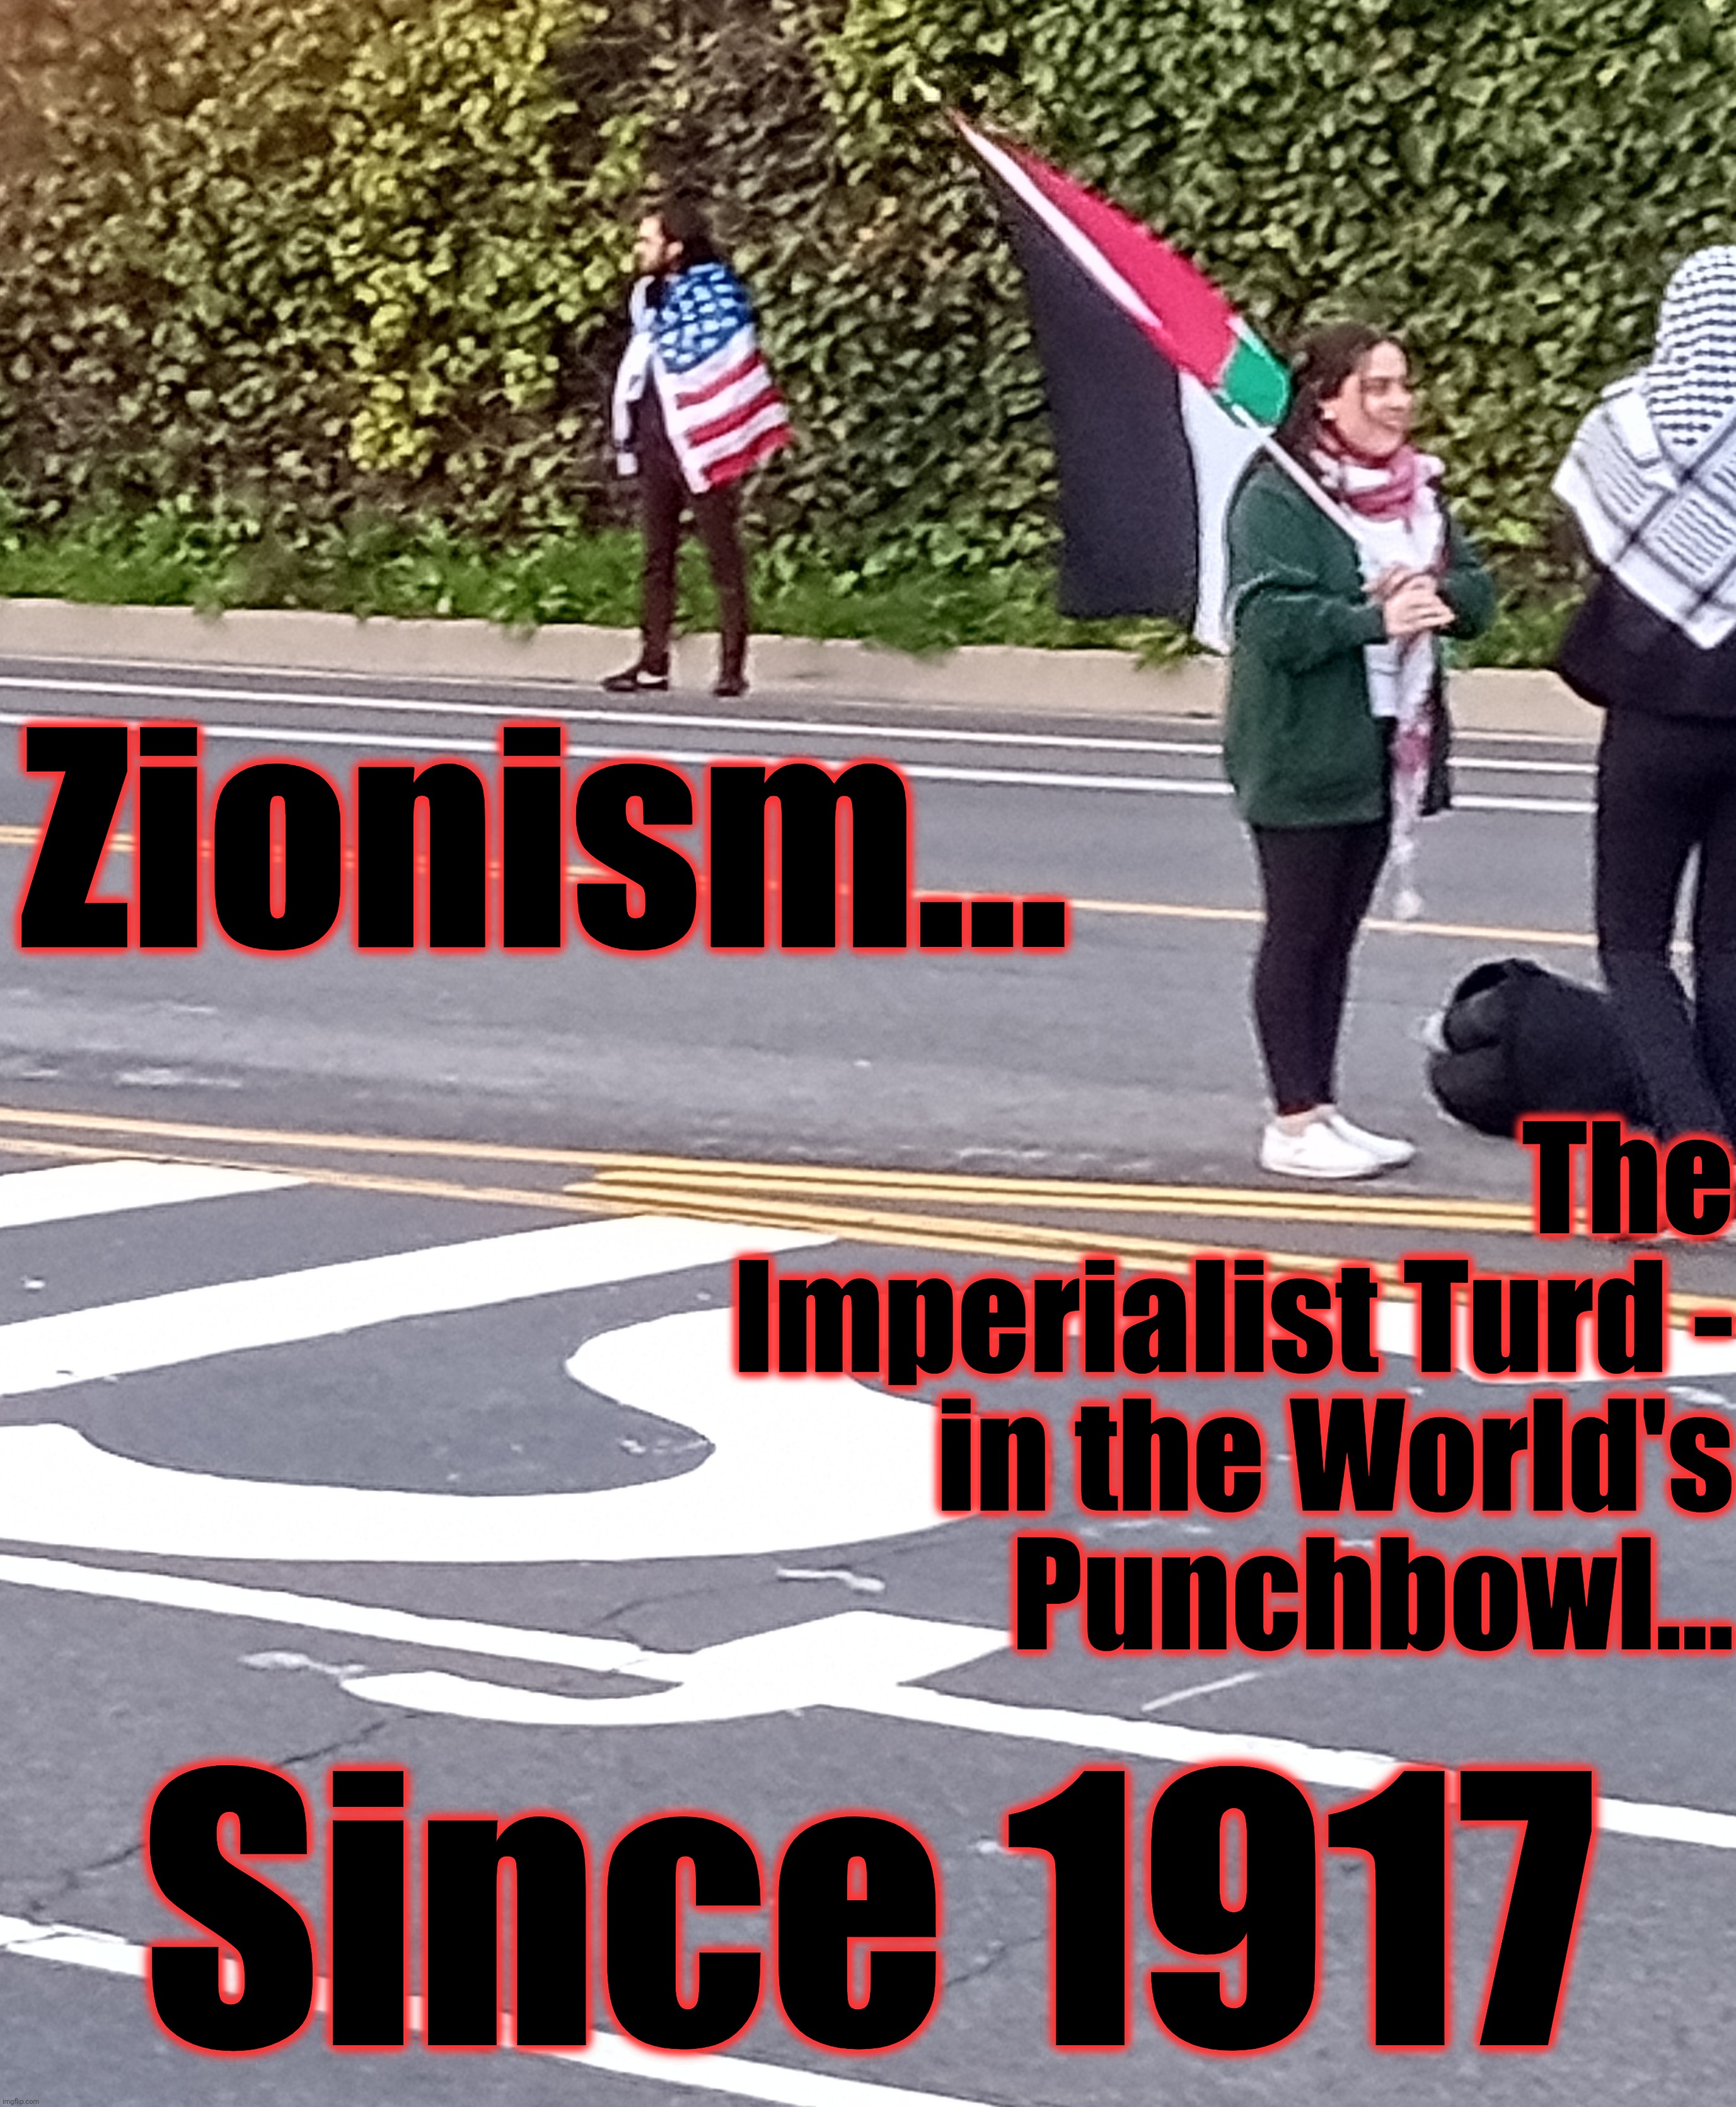 Zionism... Since 1917 The Imperialist Turd - in the World's Punchbowl... | made w/ Imgflip meme maker